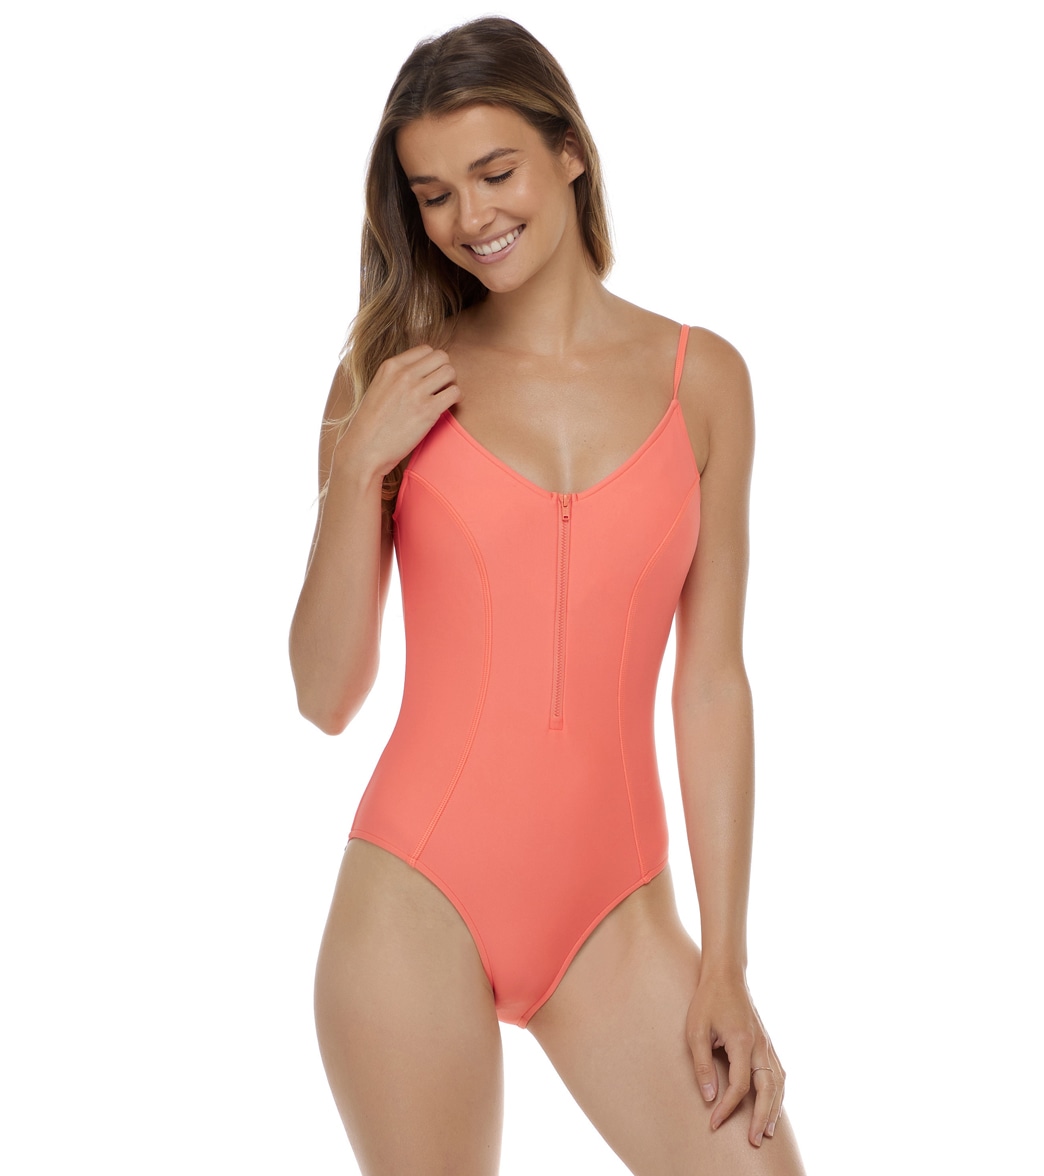 Body Glove Women's Smoothies Skylar Zip One Piece Swimsuit - Sunset Large - Swimoutlet.com